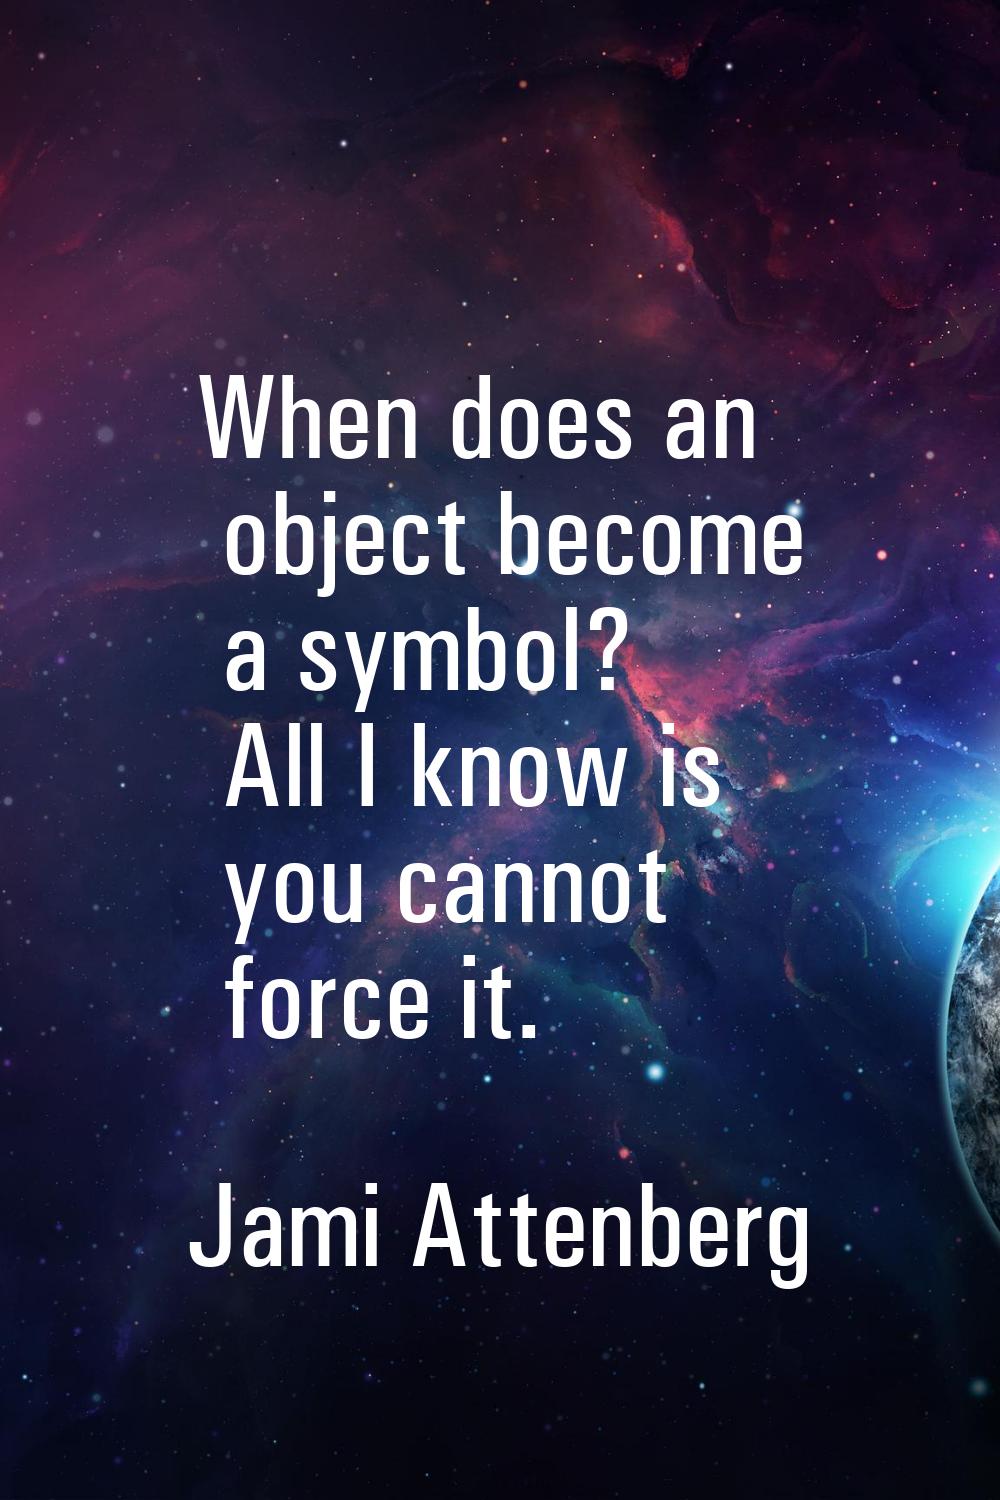 When does an object become a symbol? All I know is you cannot force it.